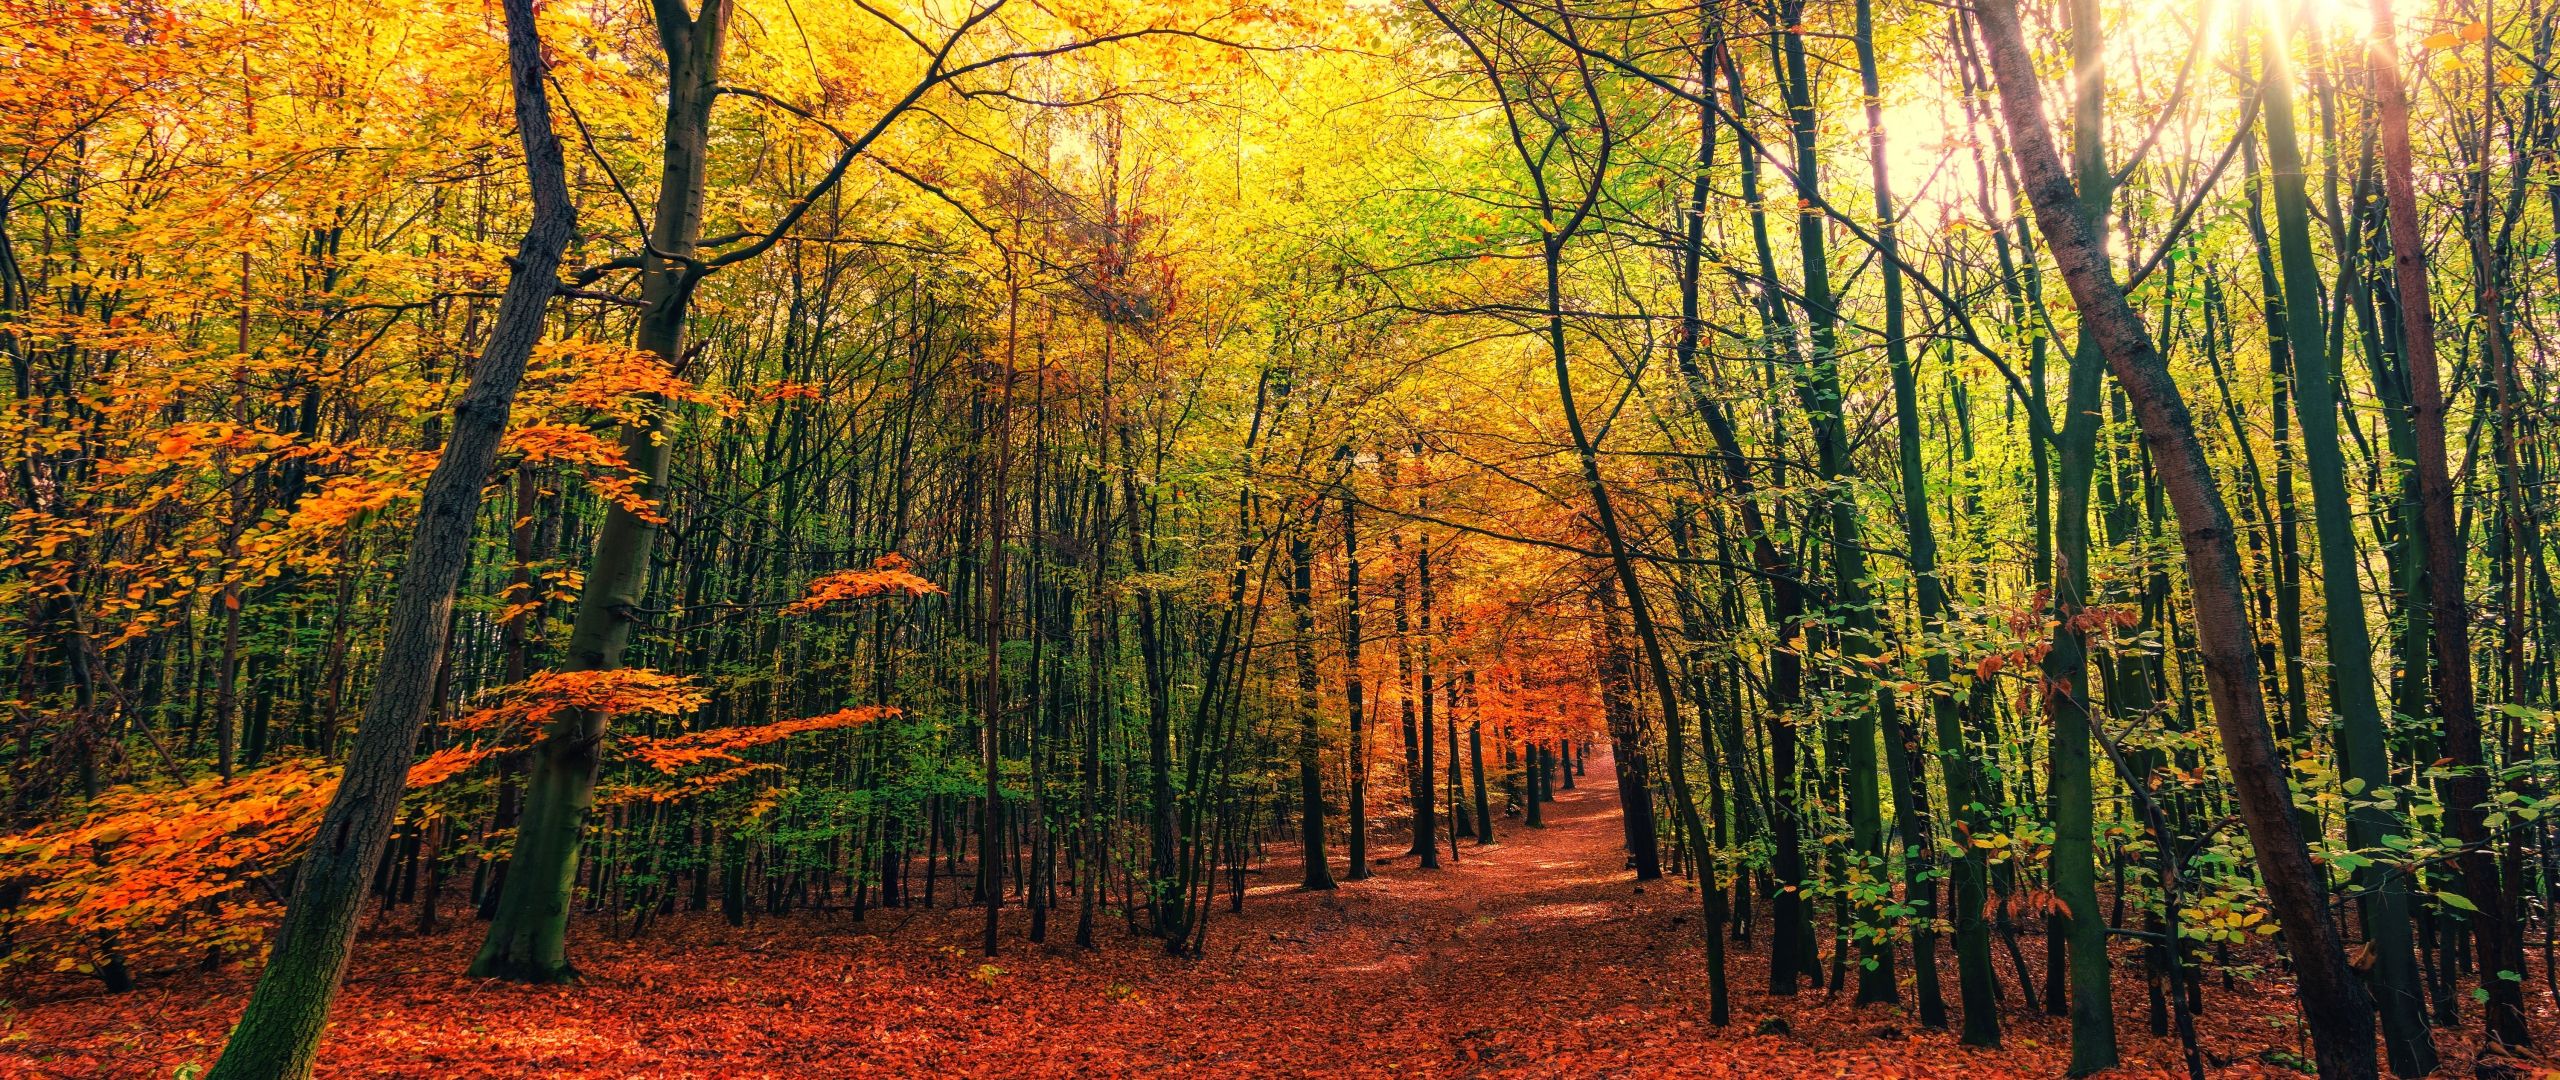 Download 2560x1080 wallpaper autumn, leaves, fall, tree, forest, nature, dual wide, widescreen, 2560x1080 HD image, background, 15509